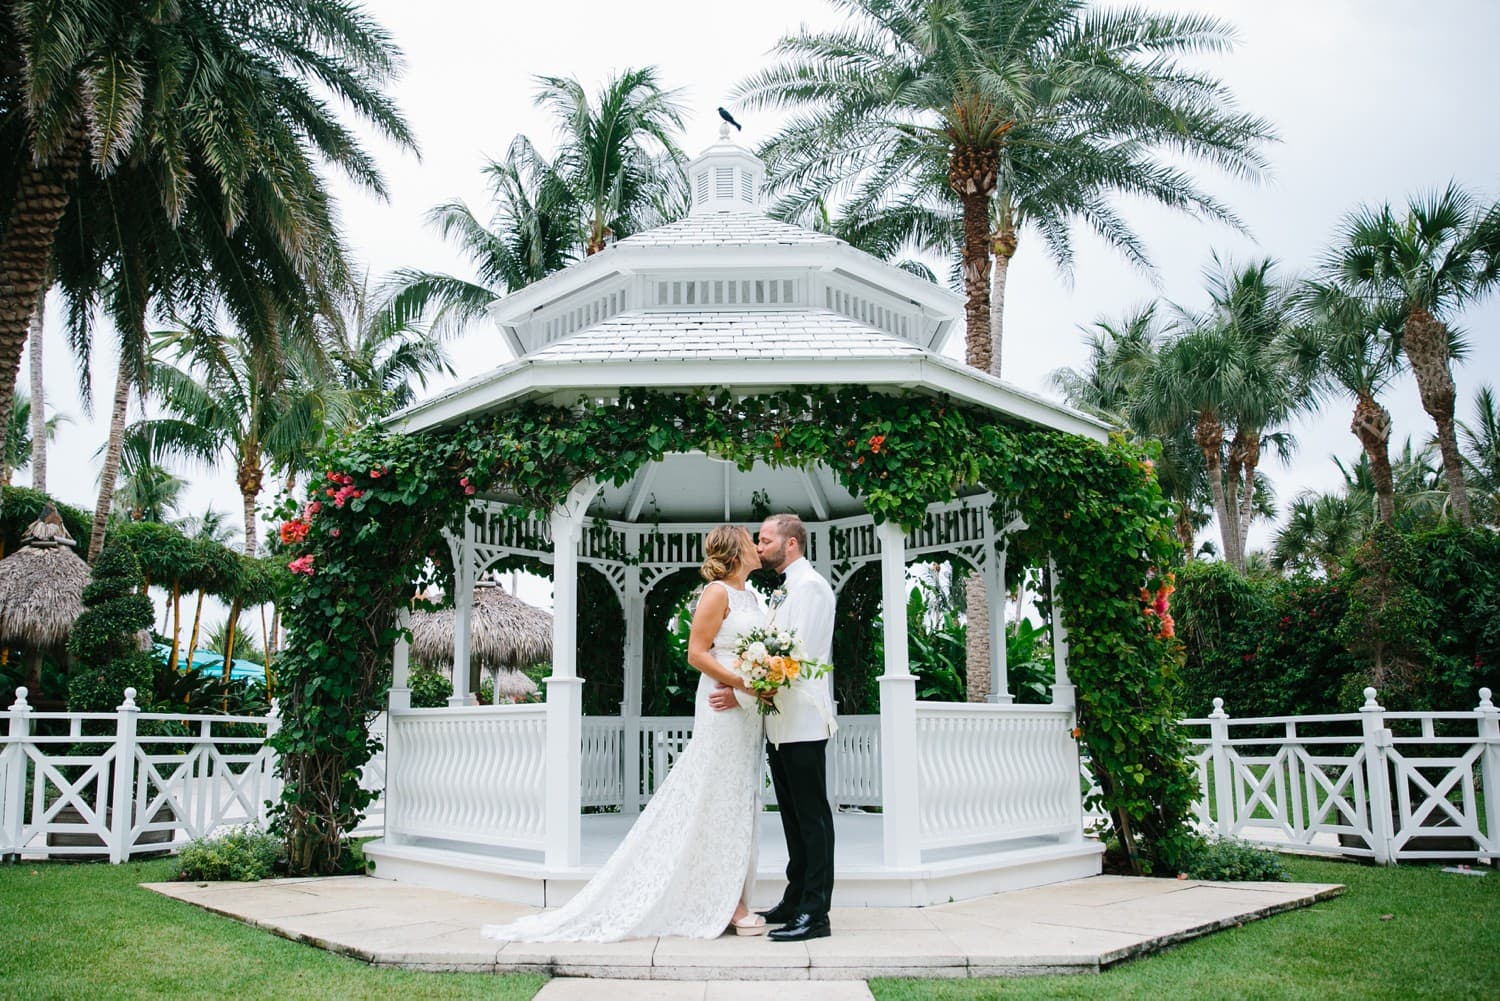 Beautiful tropical wedding at the Palms Hotel Miami